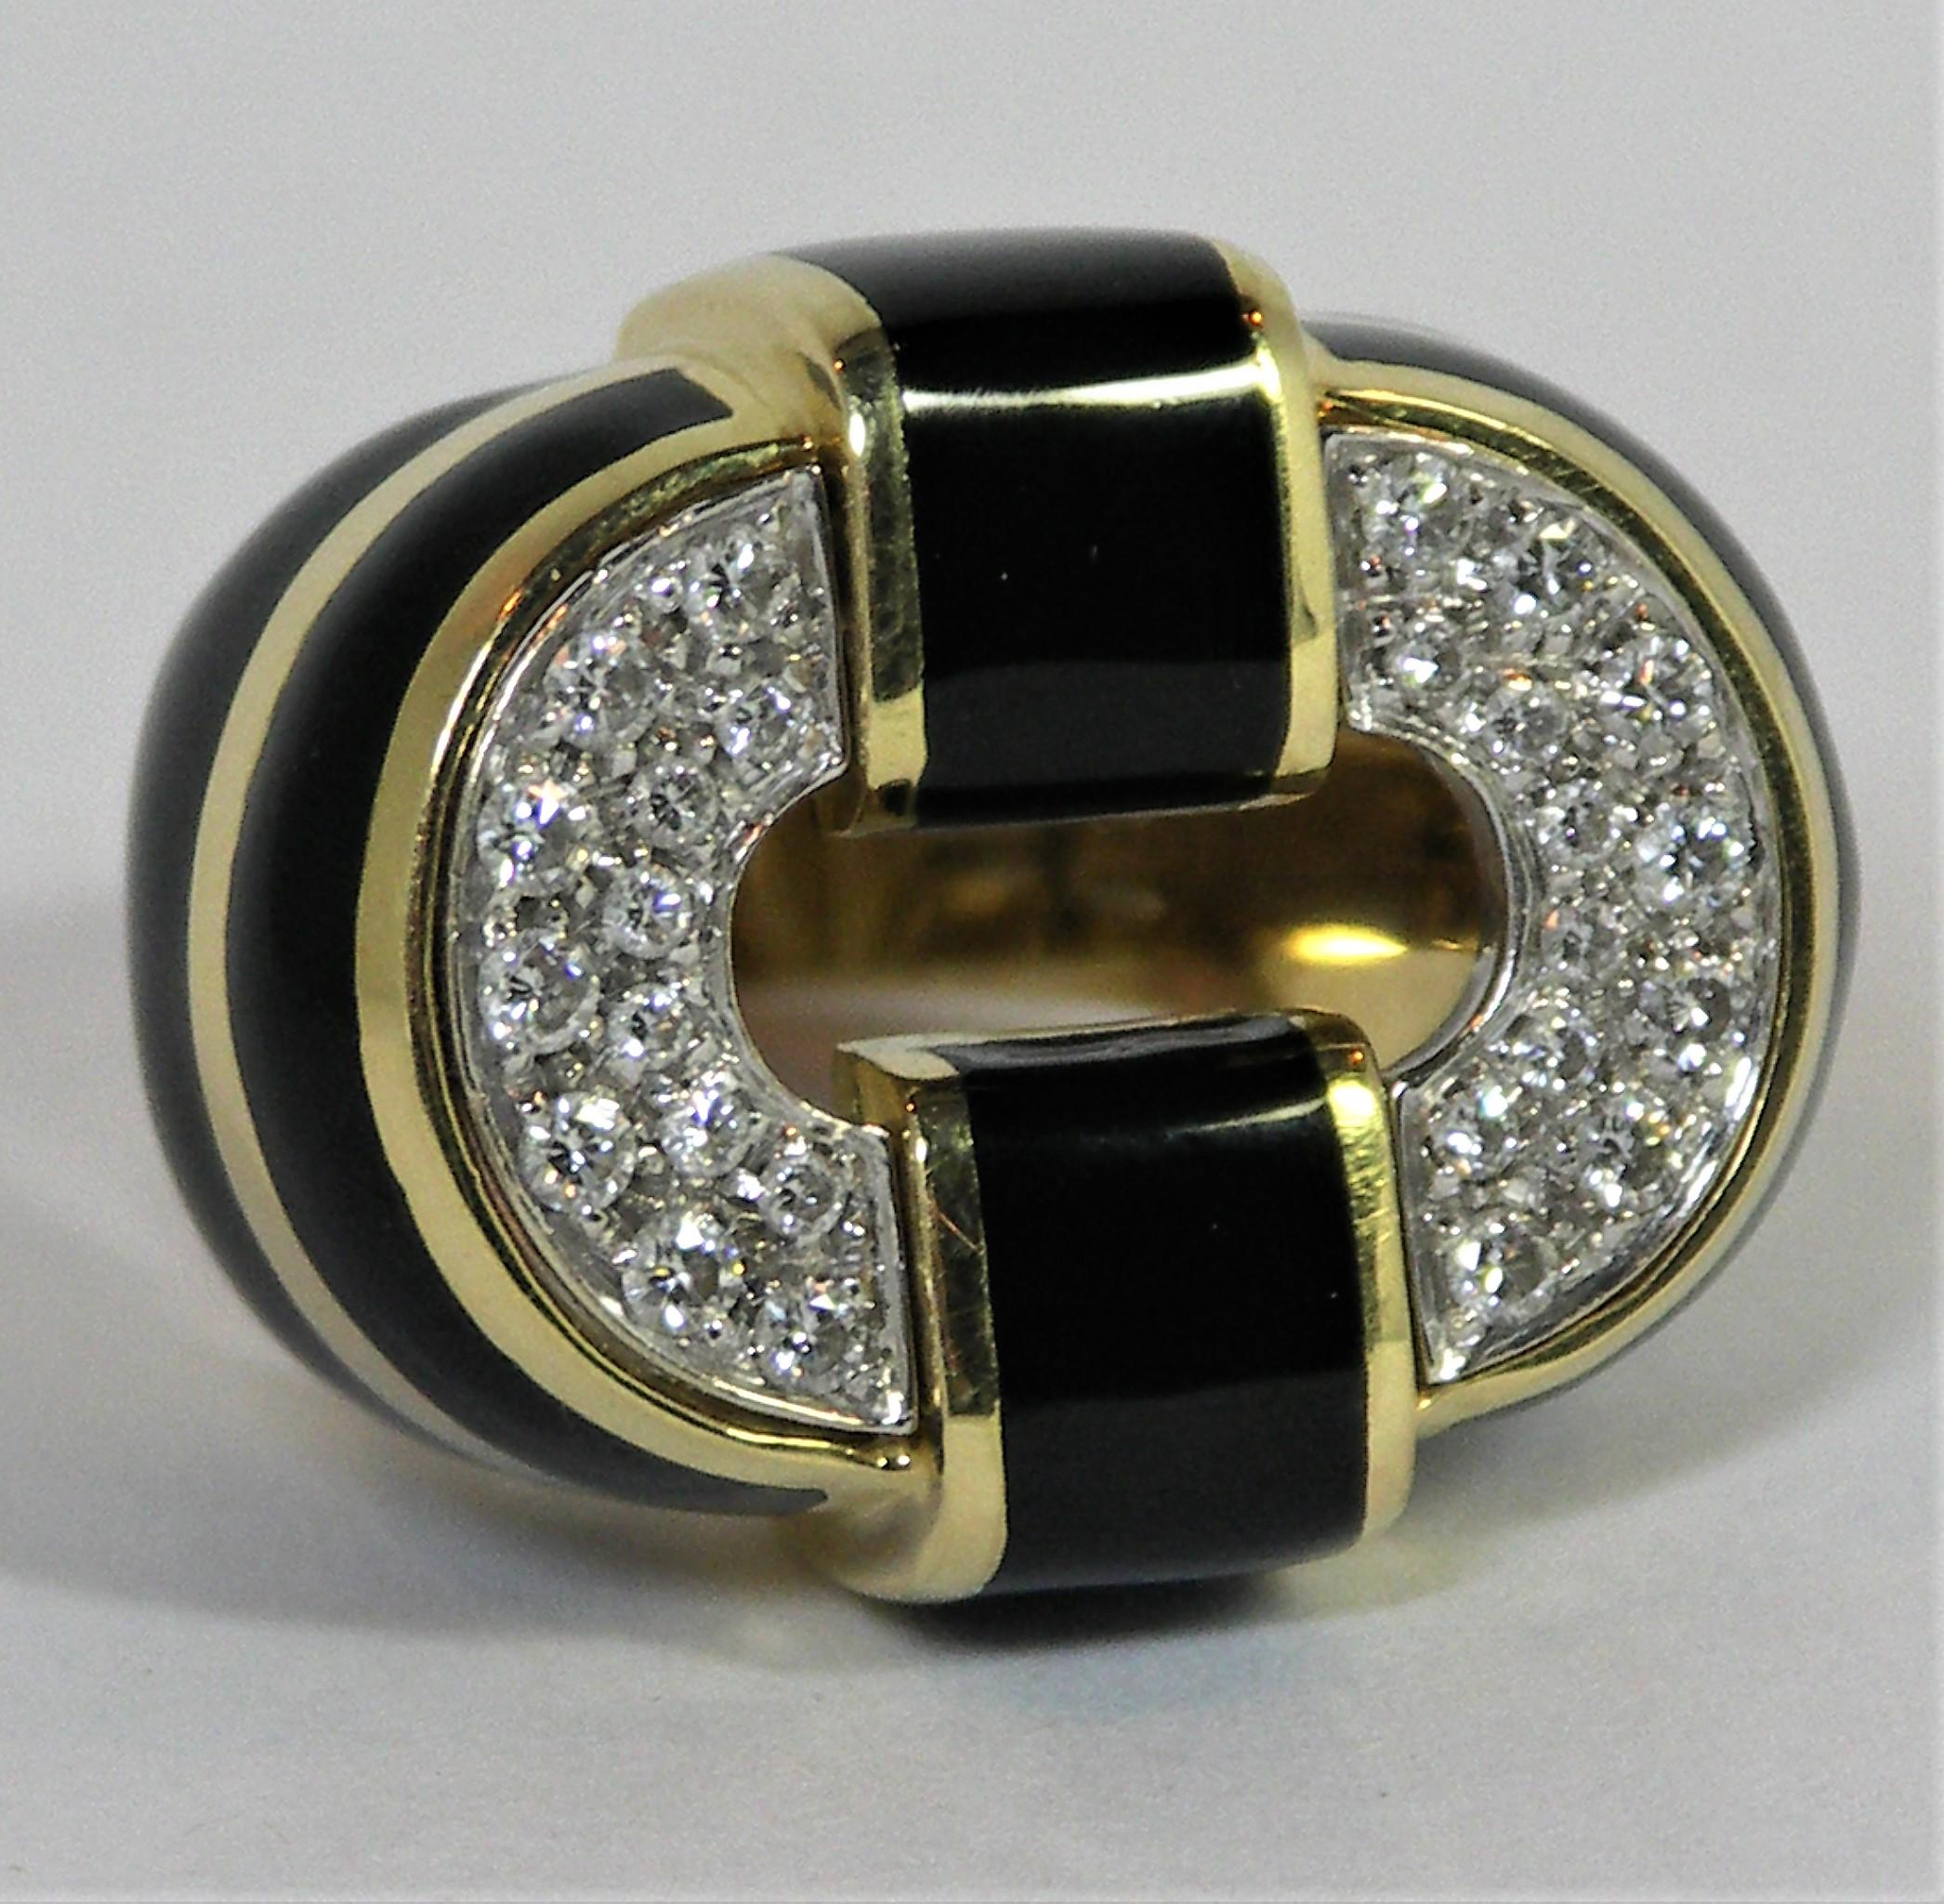 Made of 18k Yellow Gold, this striking black enamel and diamond ring makes a strong statement. The top oval is pave set with 26 round brilliant cut diamonds weighing an approximate total of .60CT of overall G/H color and VS2-SI1 Clarity. Across the